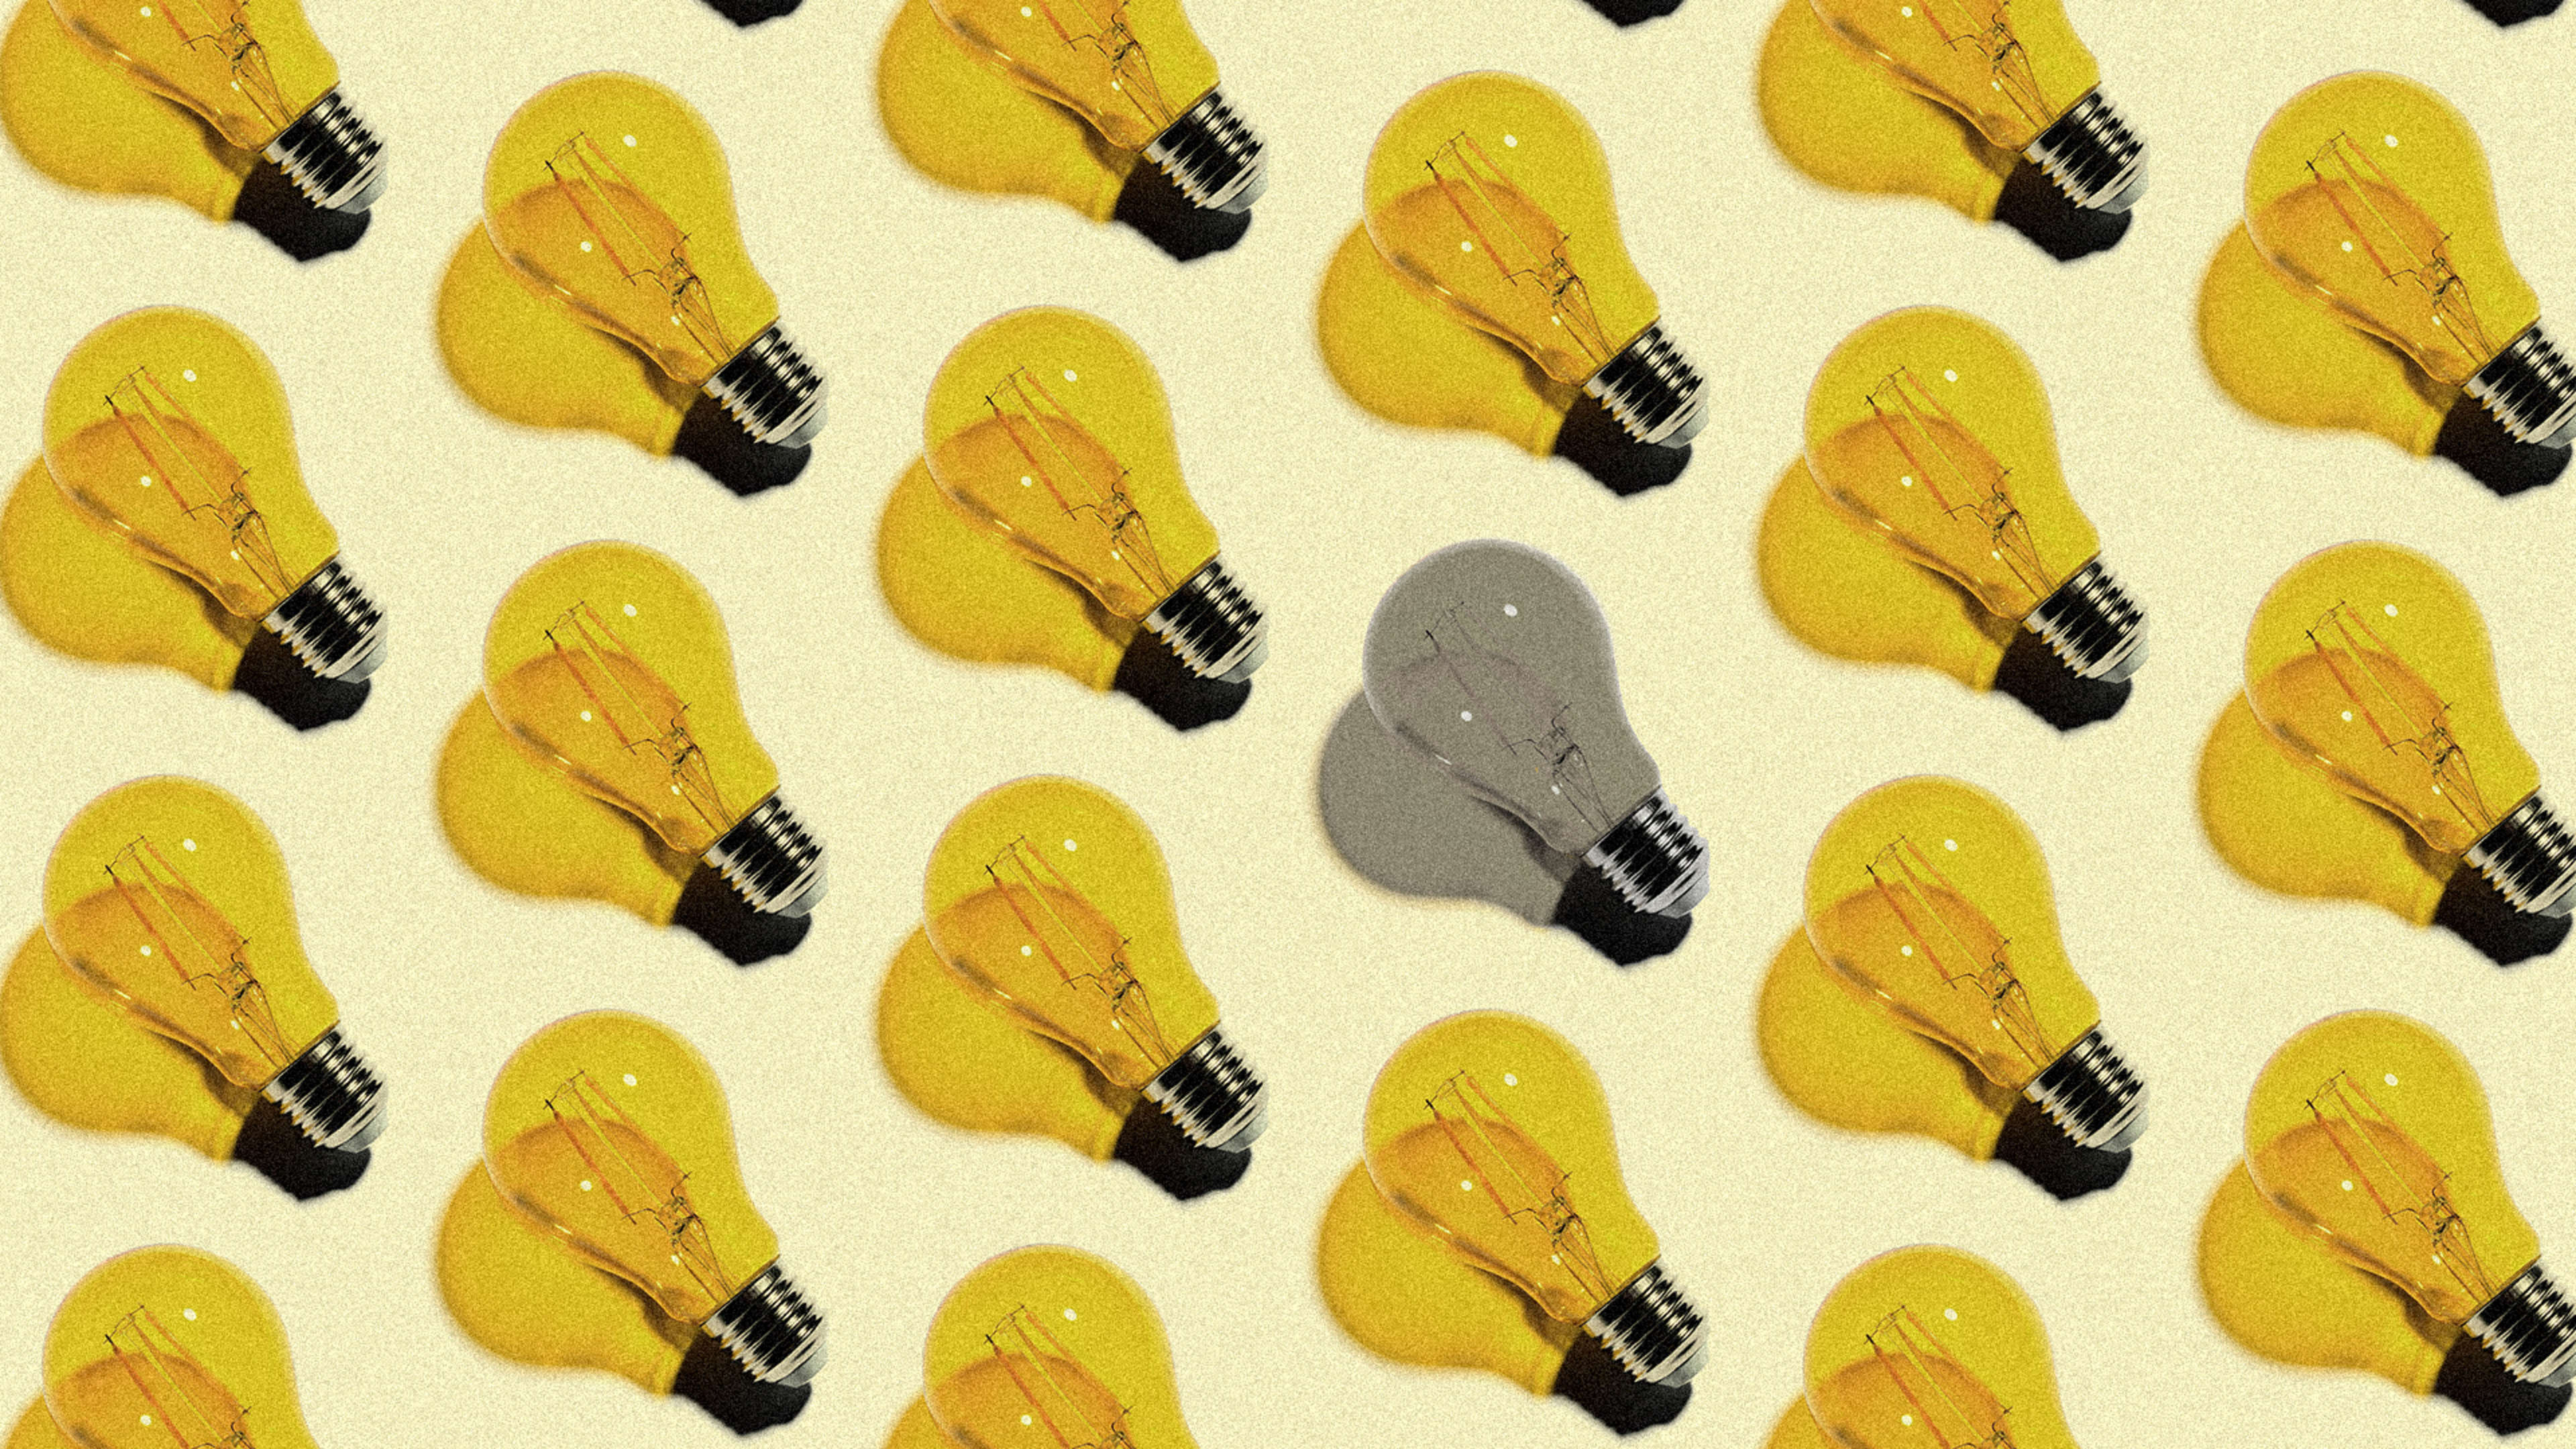 Your employees might be missing one critical tool to generate great ideas